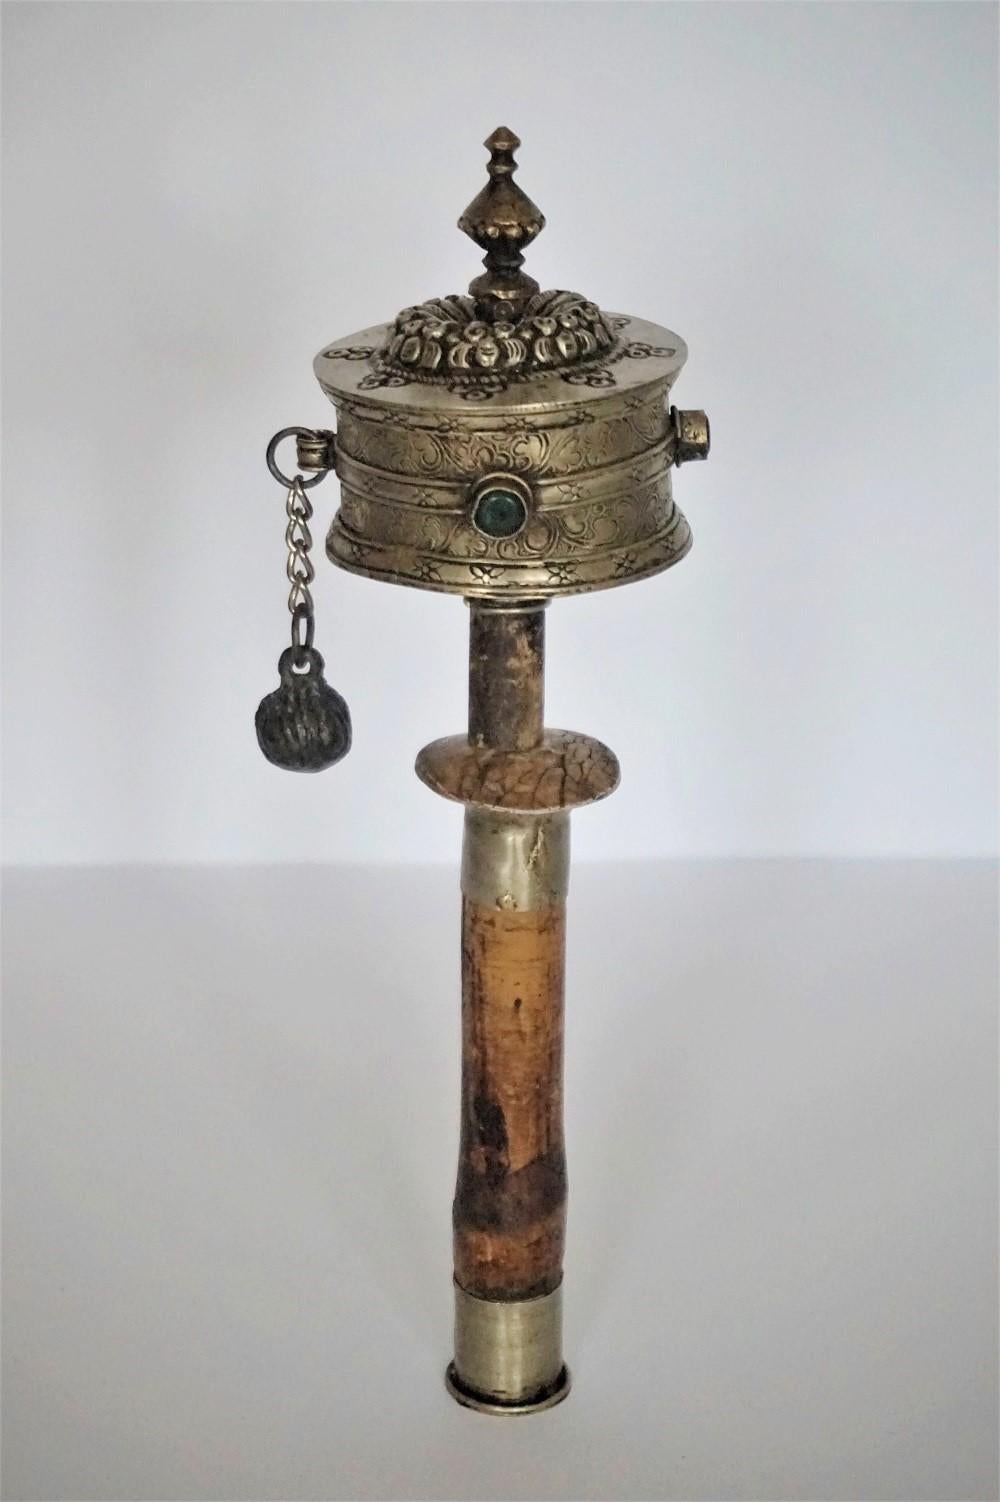 An old exclusively handmade Tibetan hand held prayer wheel, Tibet, early 19th century. The handle is of wood with silvered metal fittings. The cylinder is of embossed silvered metal with red and green stones. Inside of the cylinder there is a